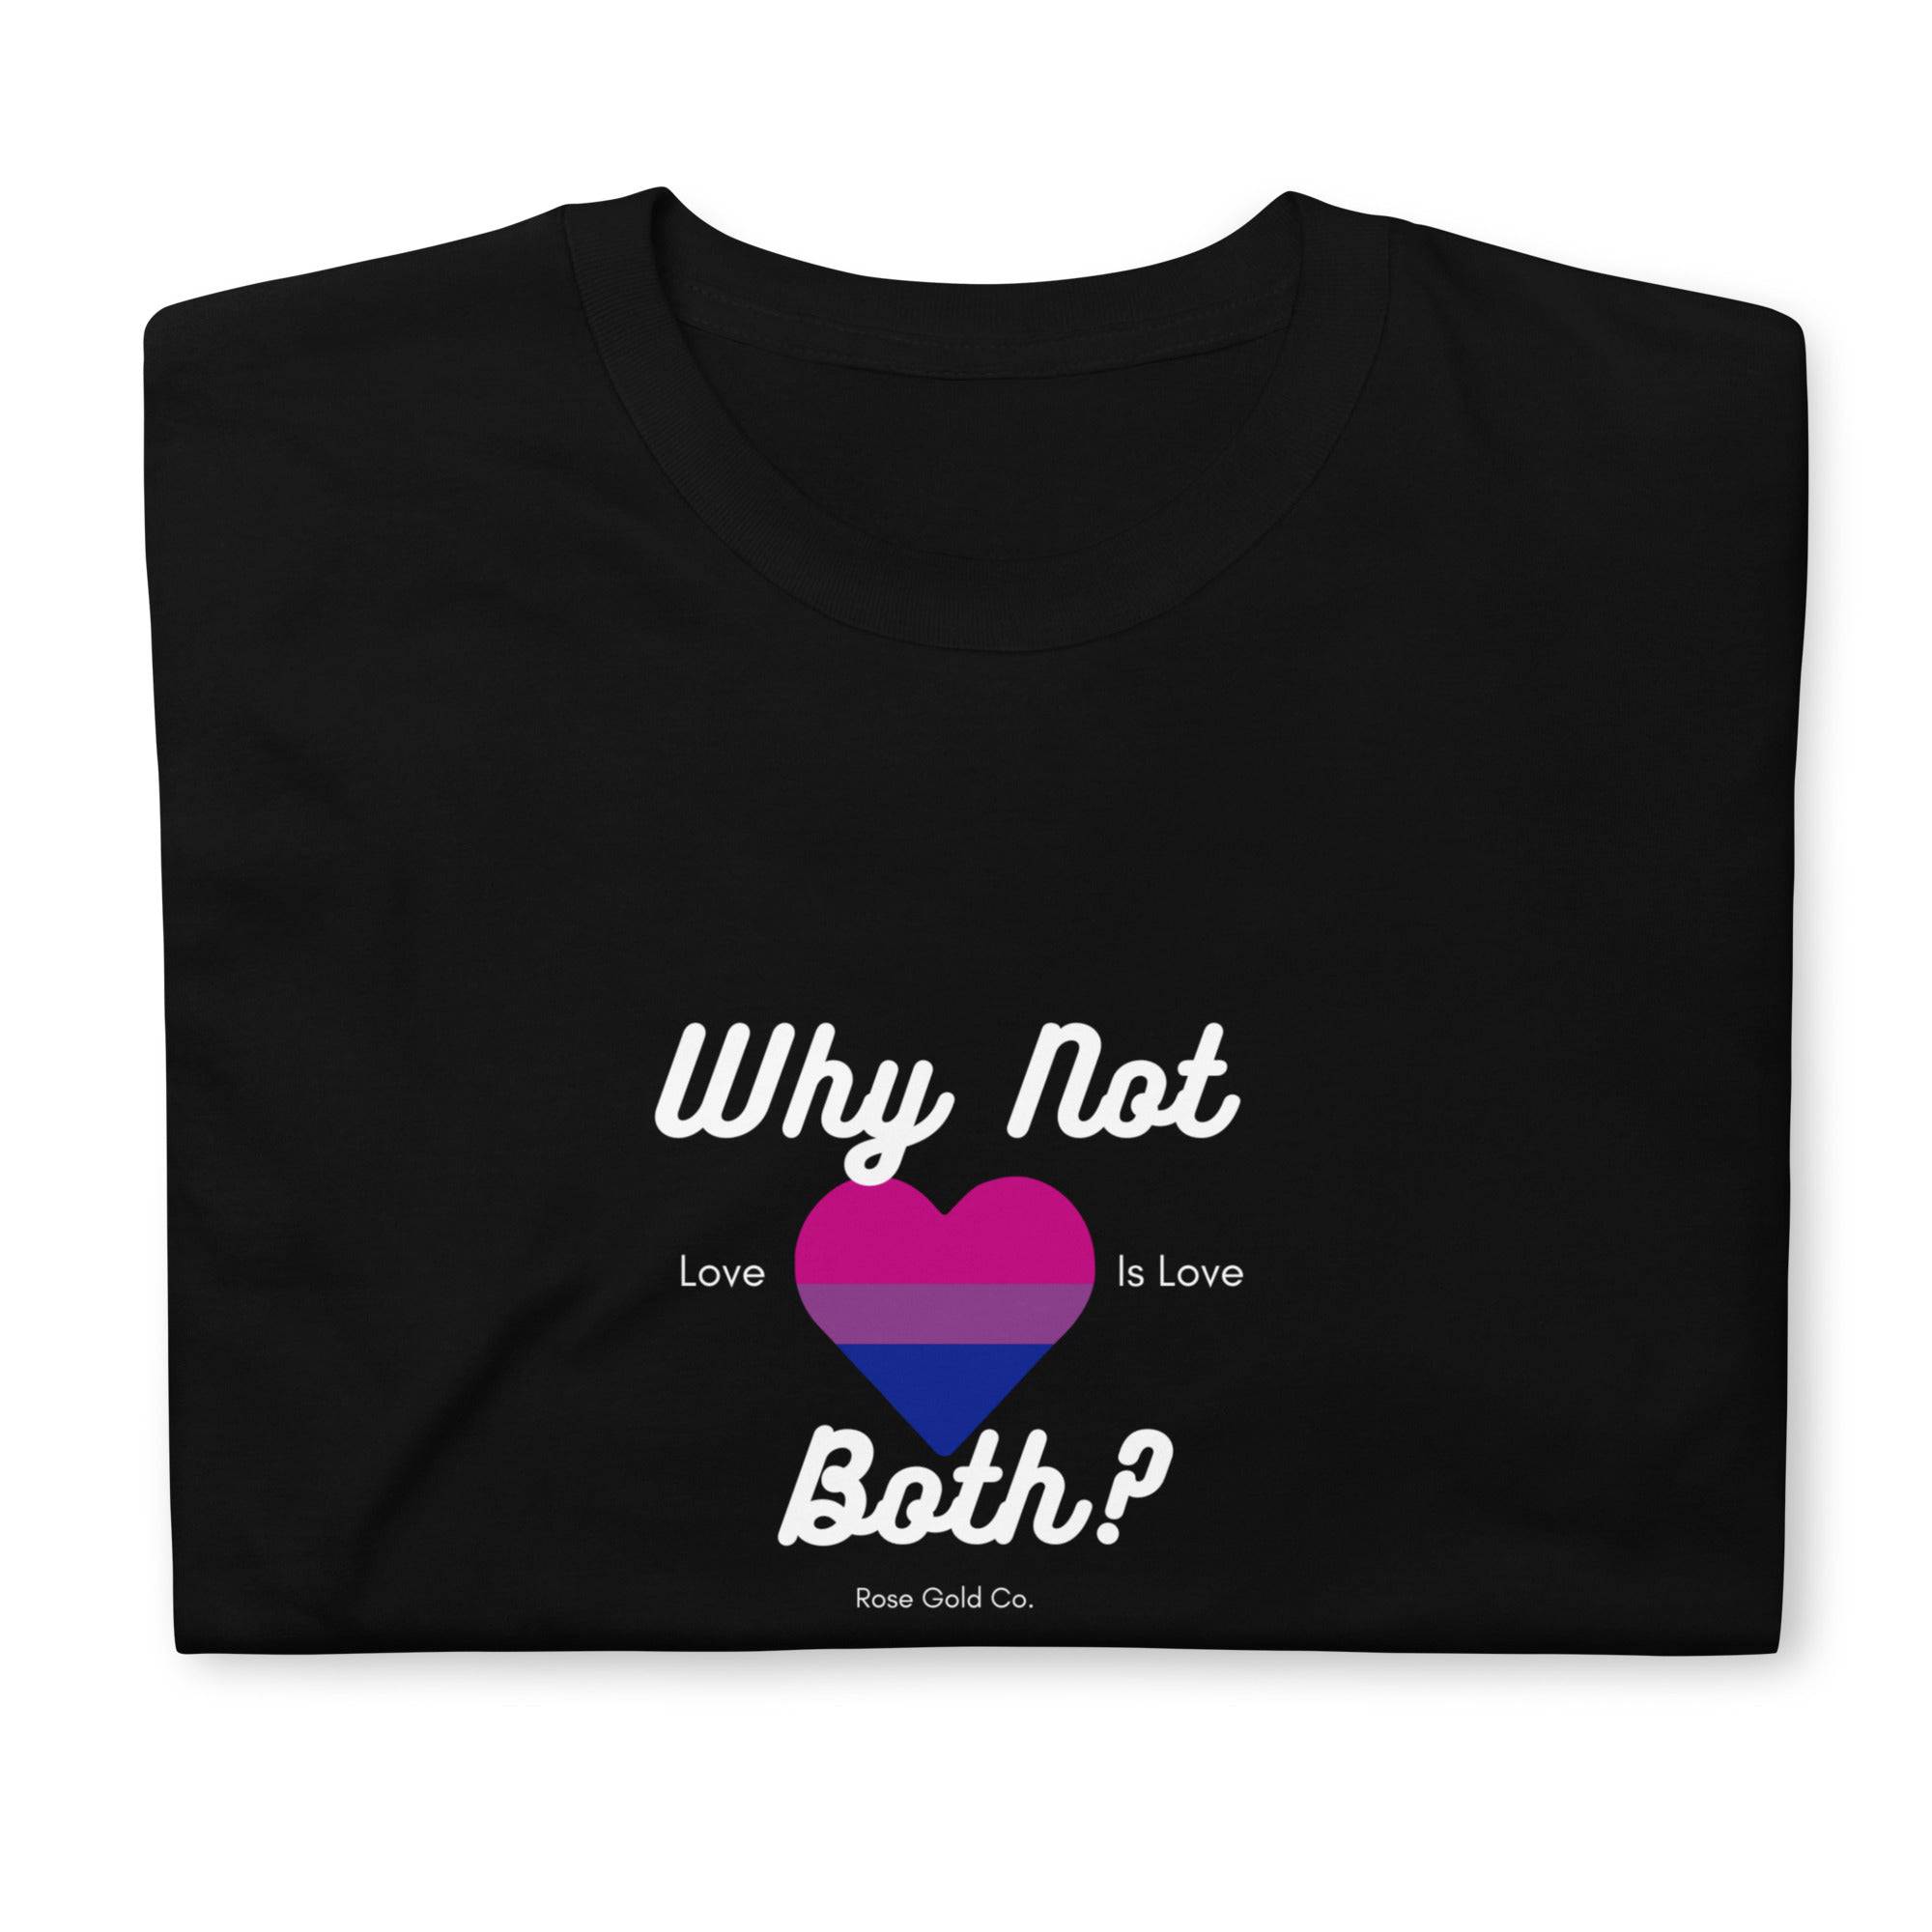 Why Not Both? Bisexual Pride T-Shirt